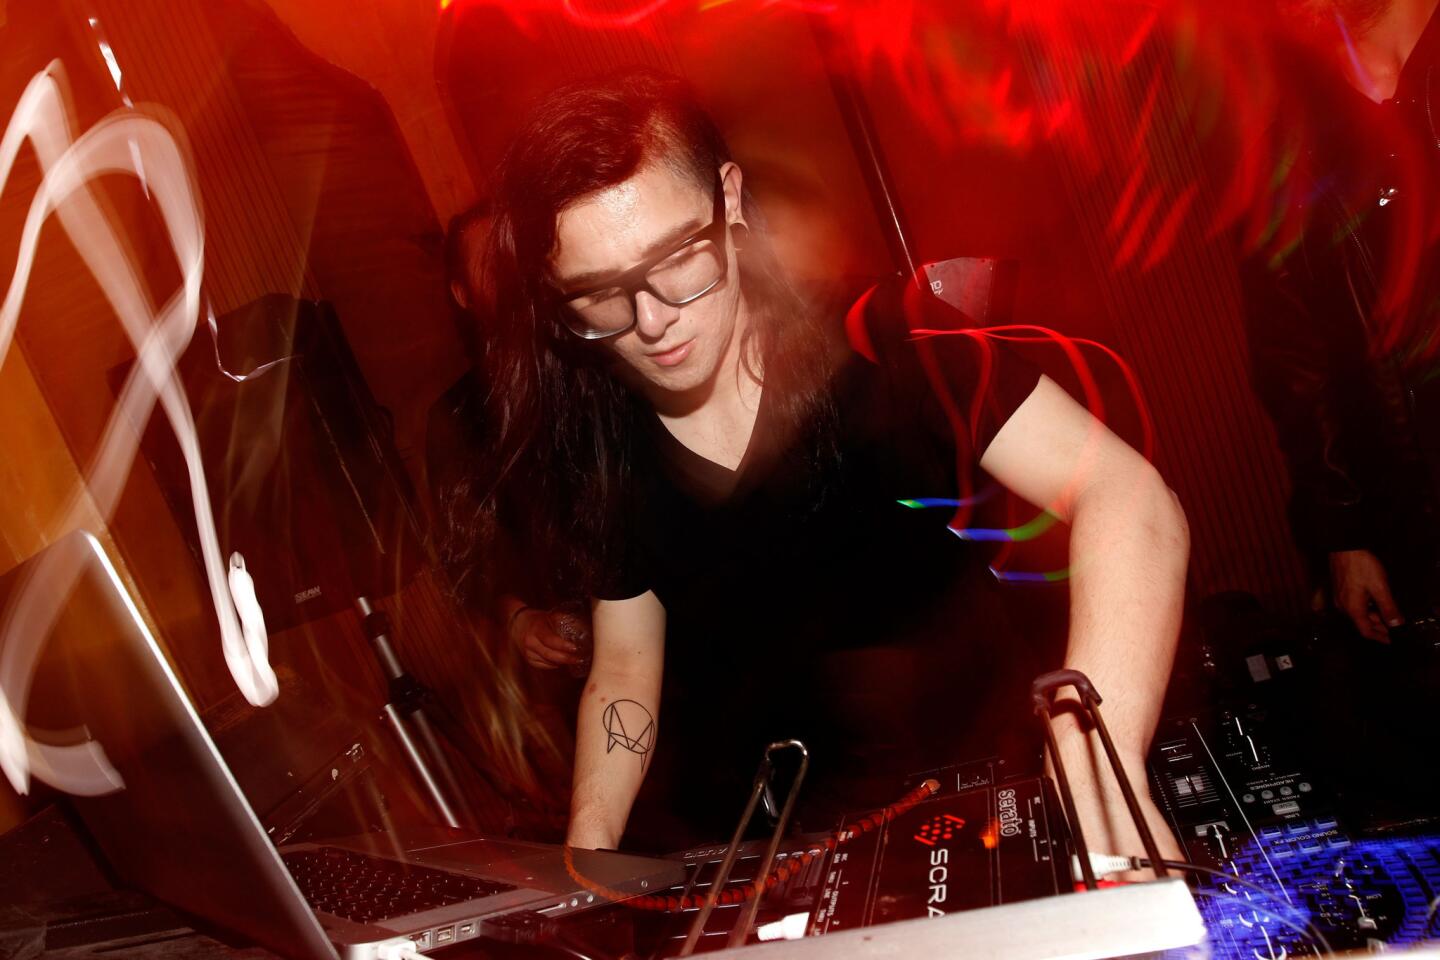 Skrillex performs "Scary Monsters and Nice Sprites," which won the best dance/electronica album Grammy Award.